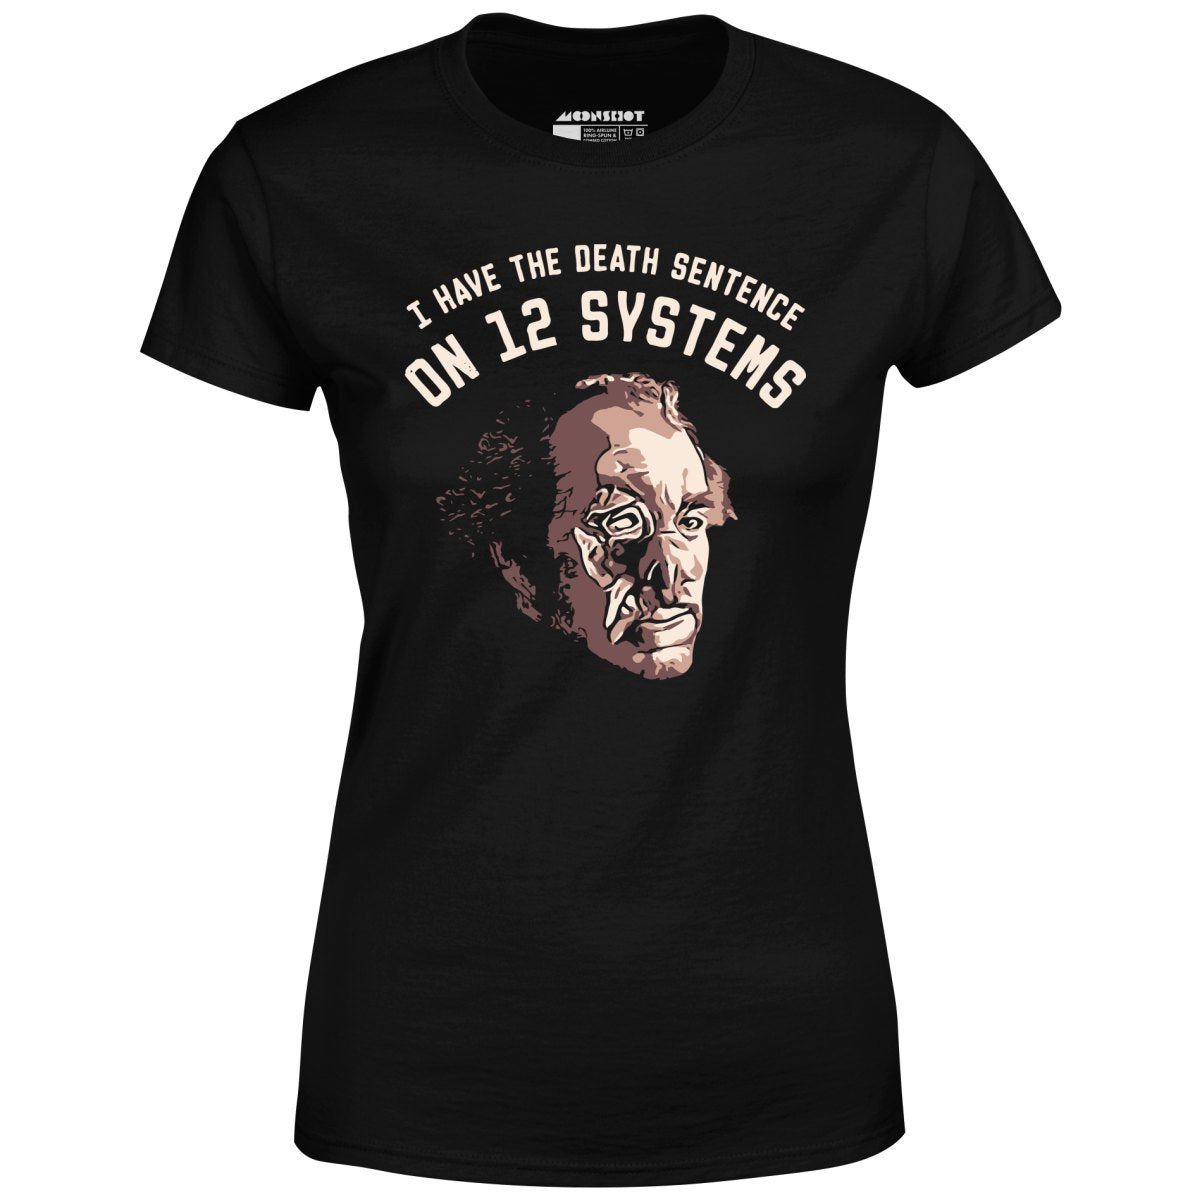 I Have the Death Sentence on 12 Systems - Women's T-Shirt